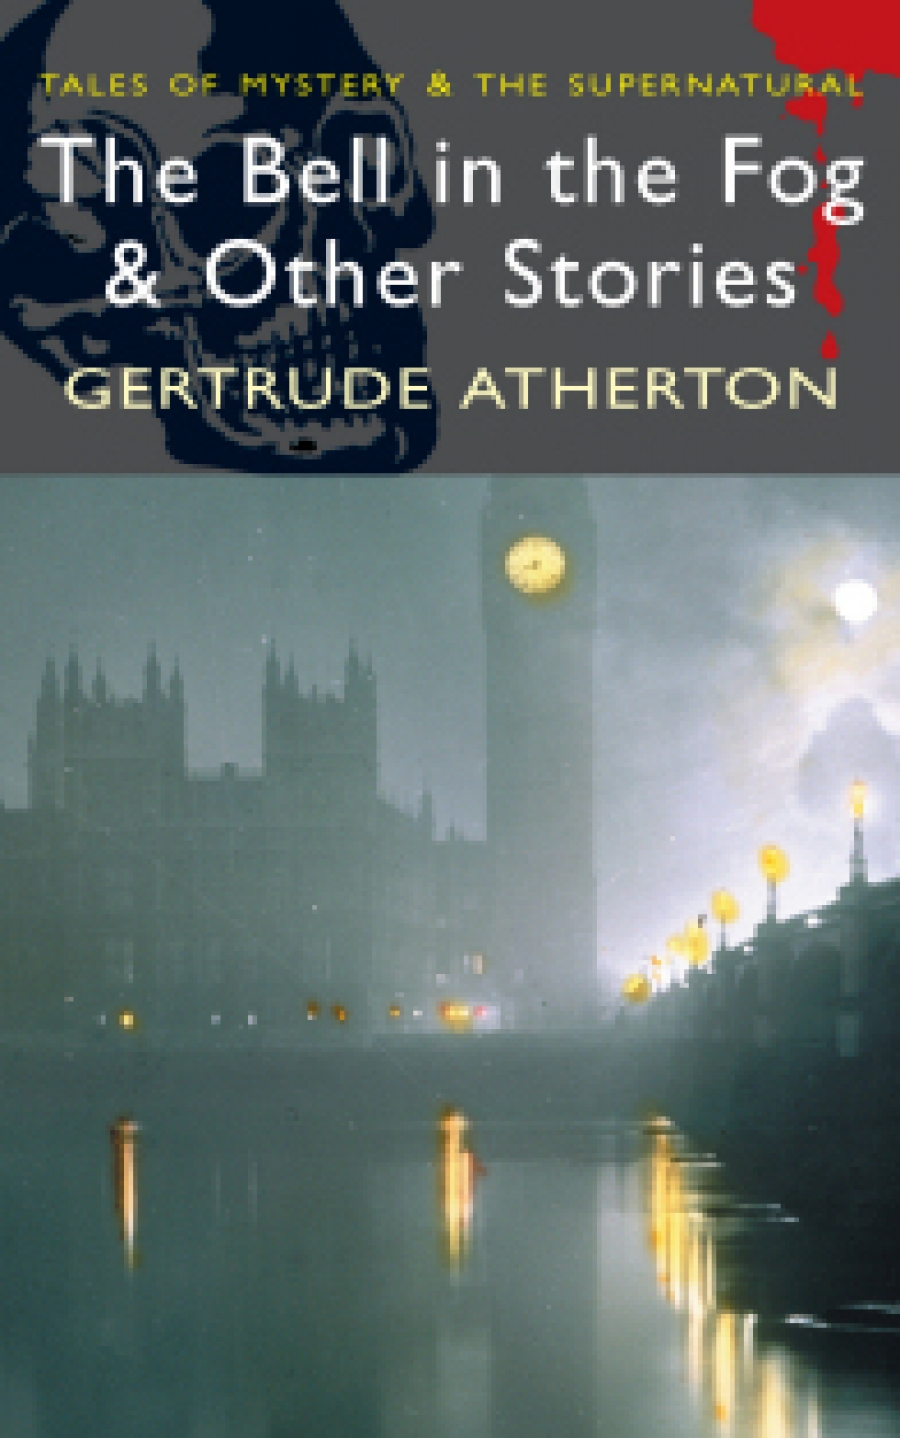 Gertrude, Atherton The Bell in the Fog & Other Stories 